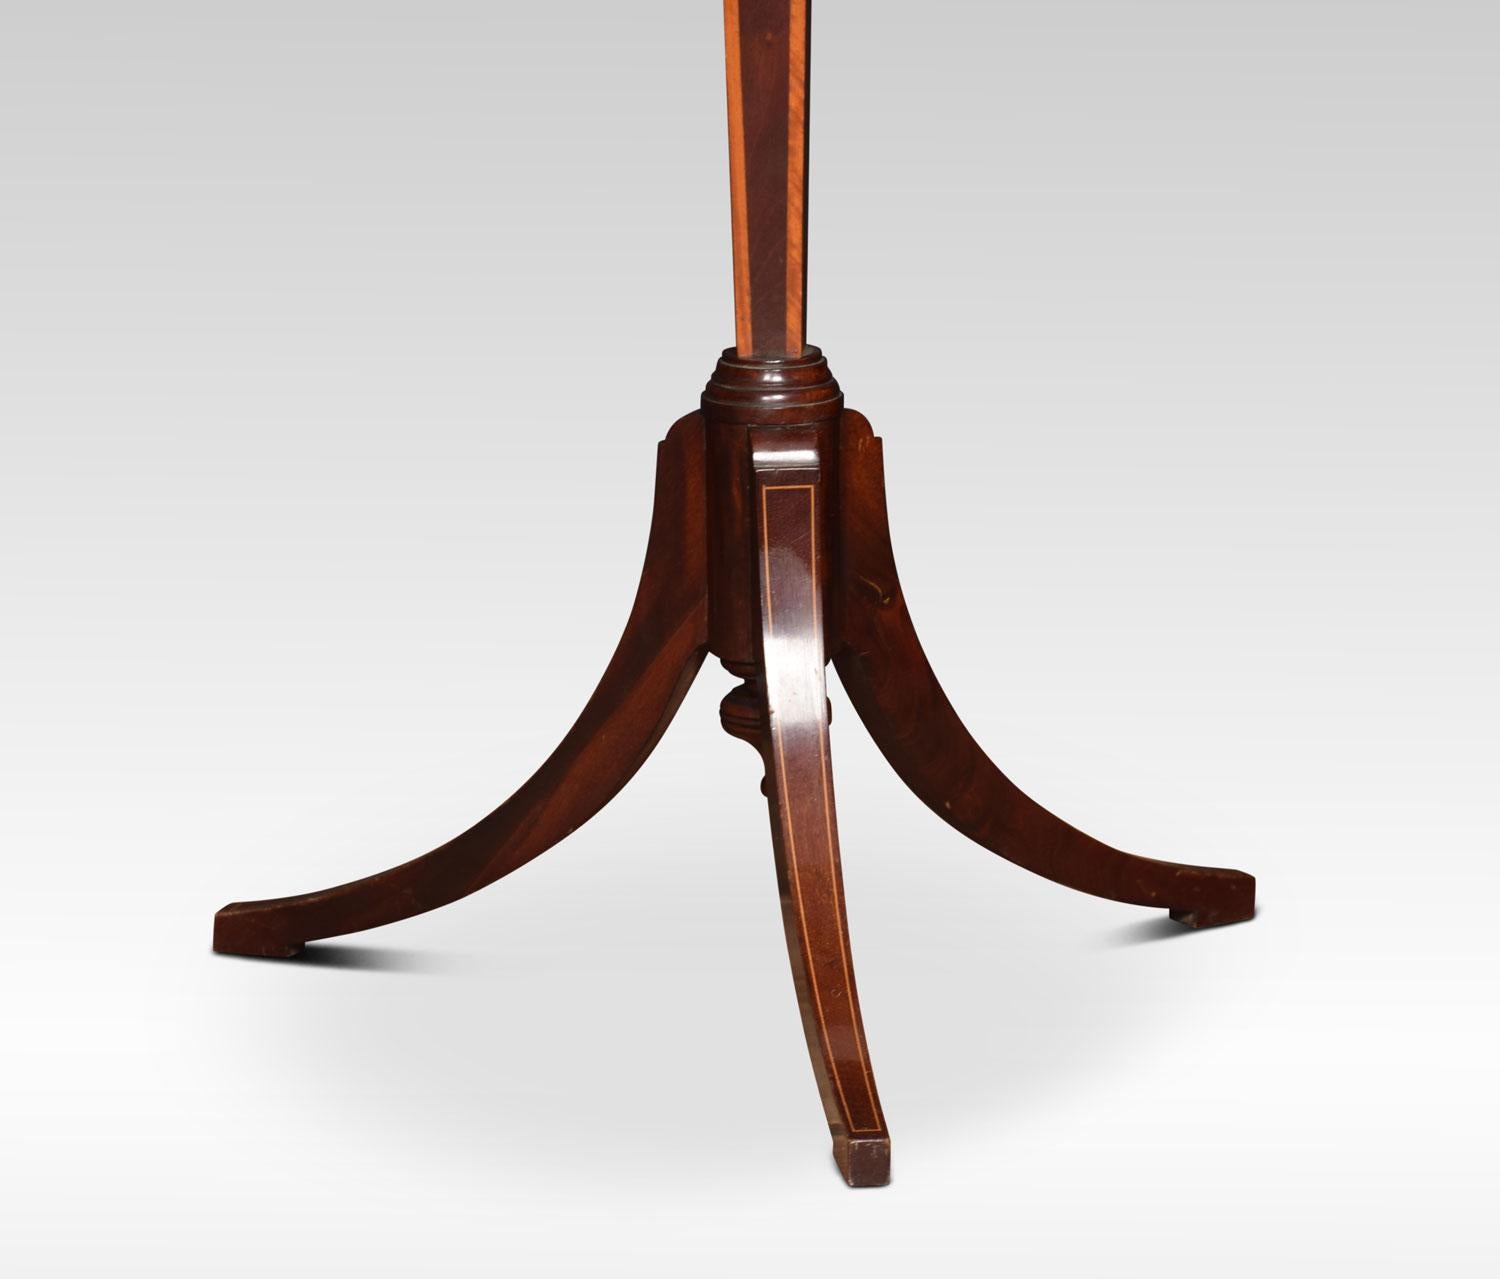 Sheraton revival mahogany shaving stand, the shield shaped beveled mirror on brass adjustable pole, above circular shelf. All raised up on turned stem with three slender splayed legs.
Dimensions:
Height 64.5 inches adjustable
width 19